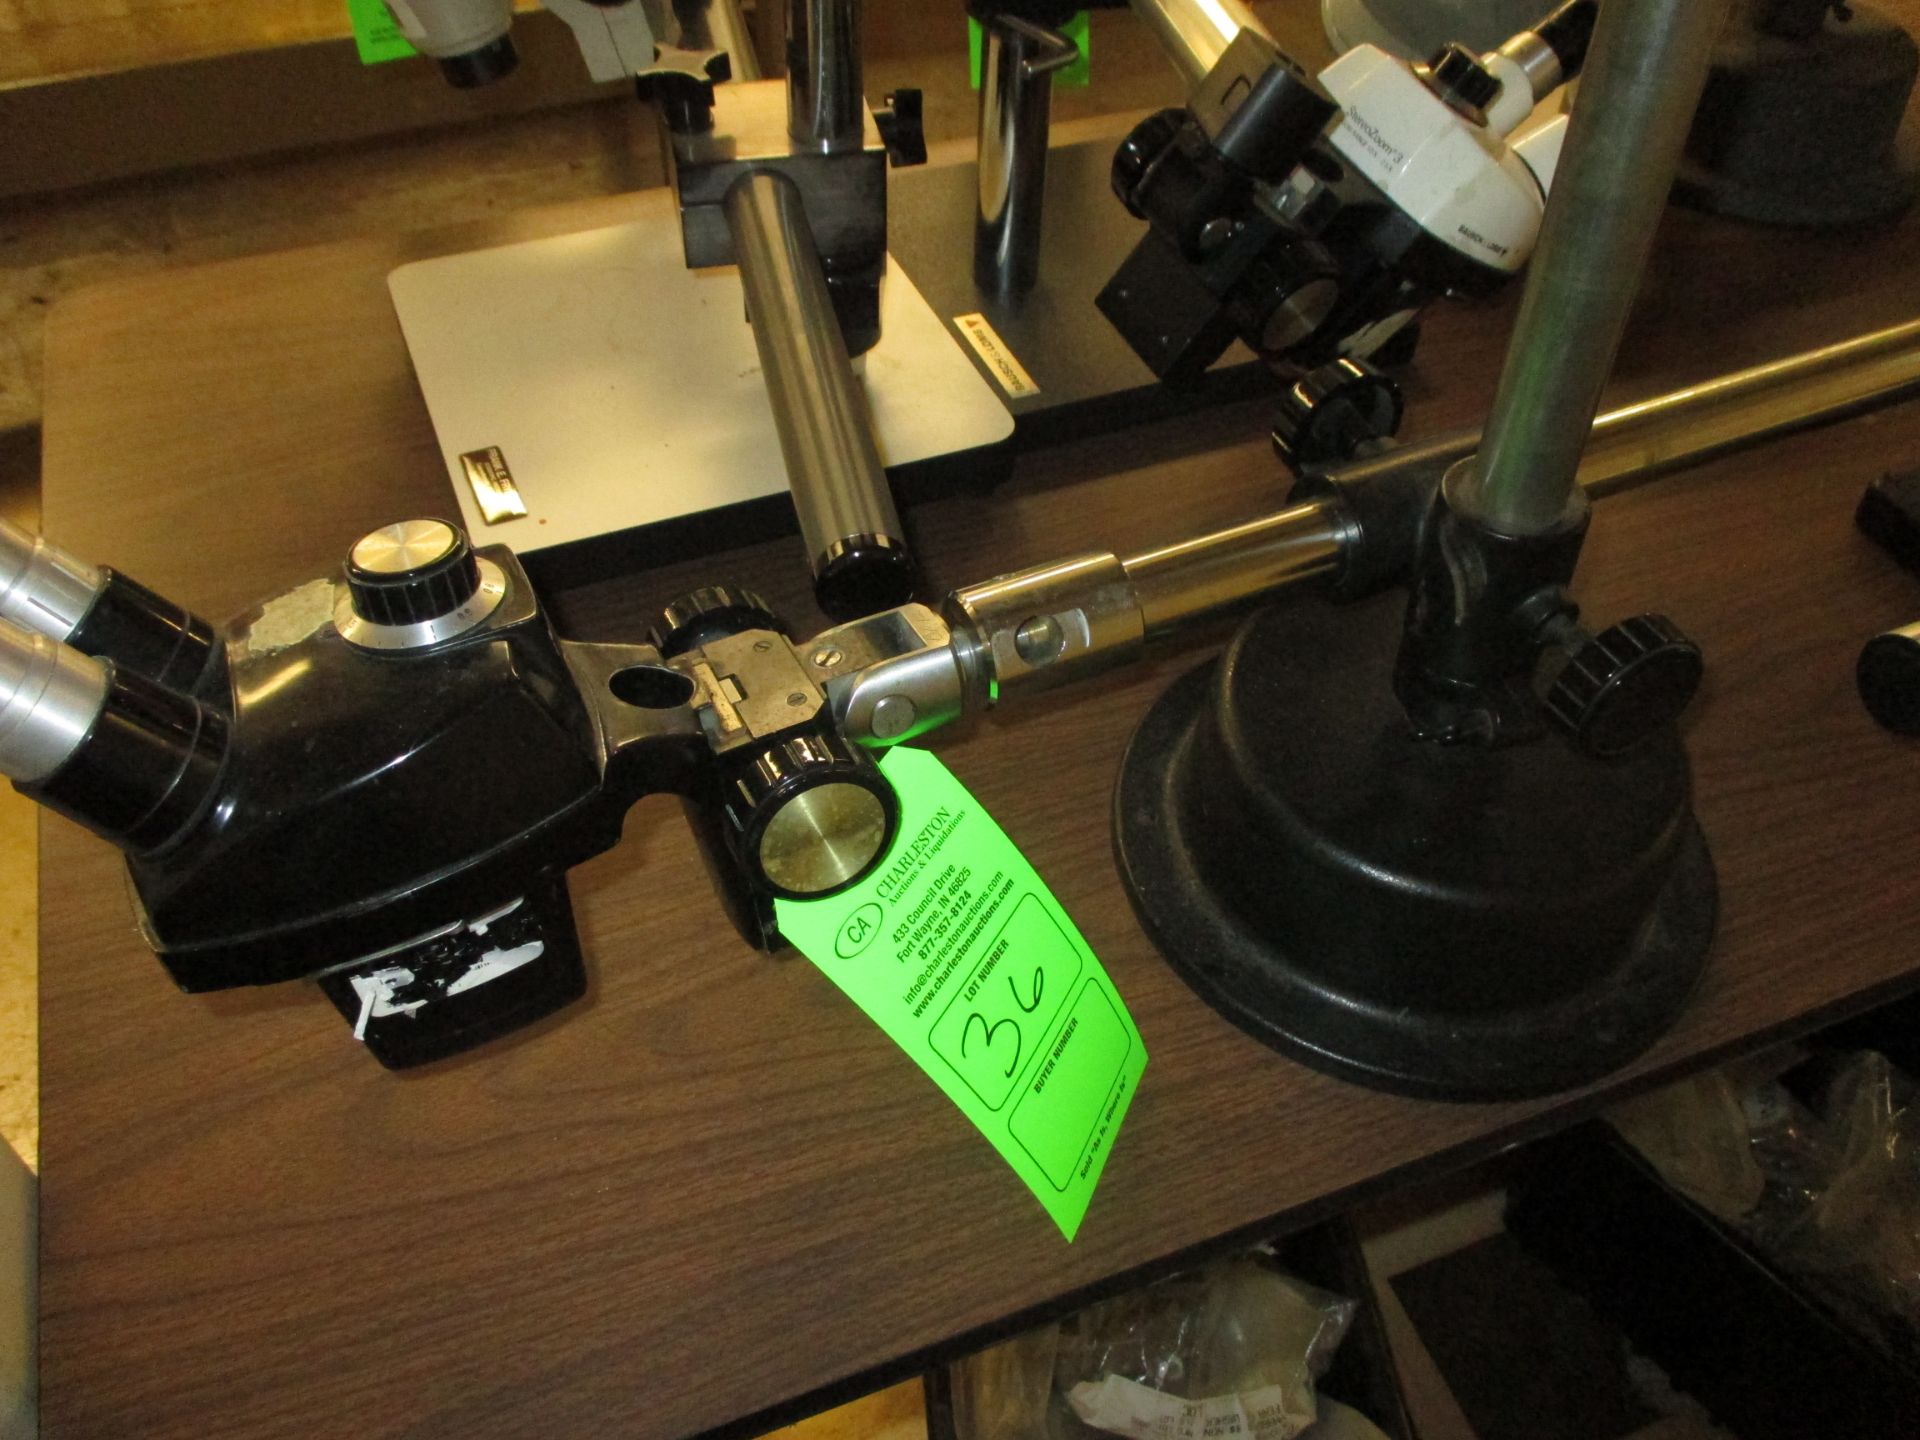 BAUSCH & LOMB MICROSCOPE; 0.7 X 3X (Multiple locations. Please see full description)